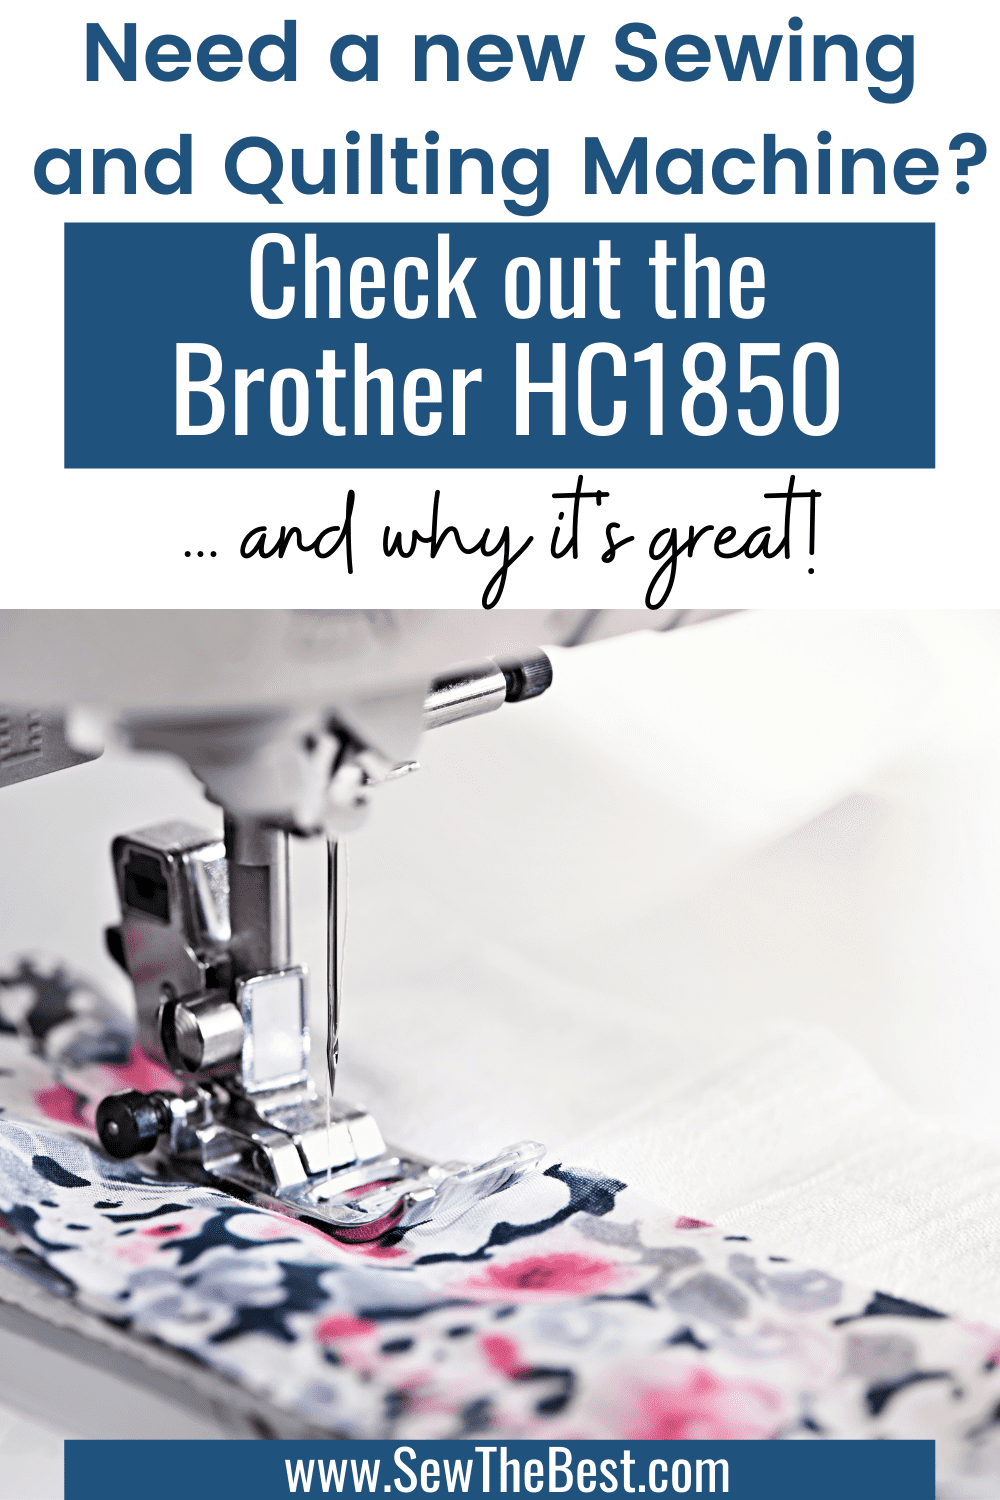 Need a new Sewing and Quilting Machine? Check out the Brother HC1850 ... and why it's great! Photo of a sewing machine follows.